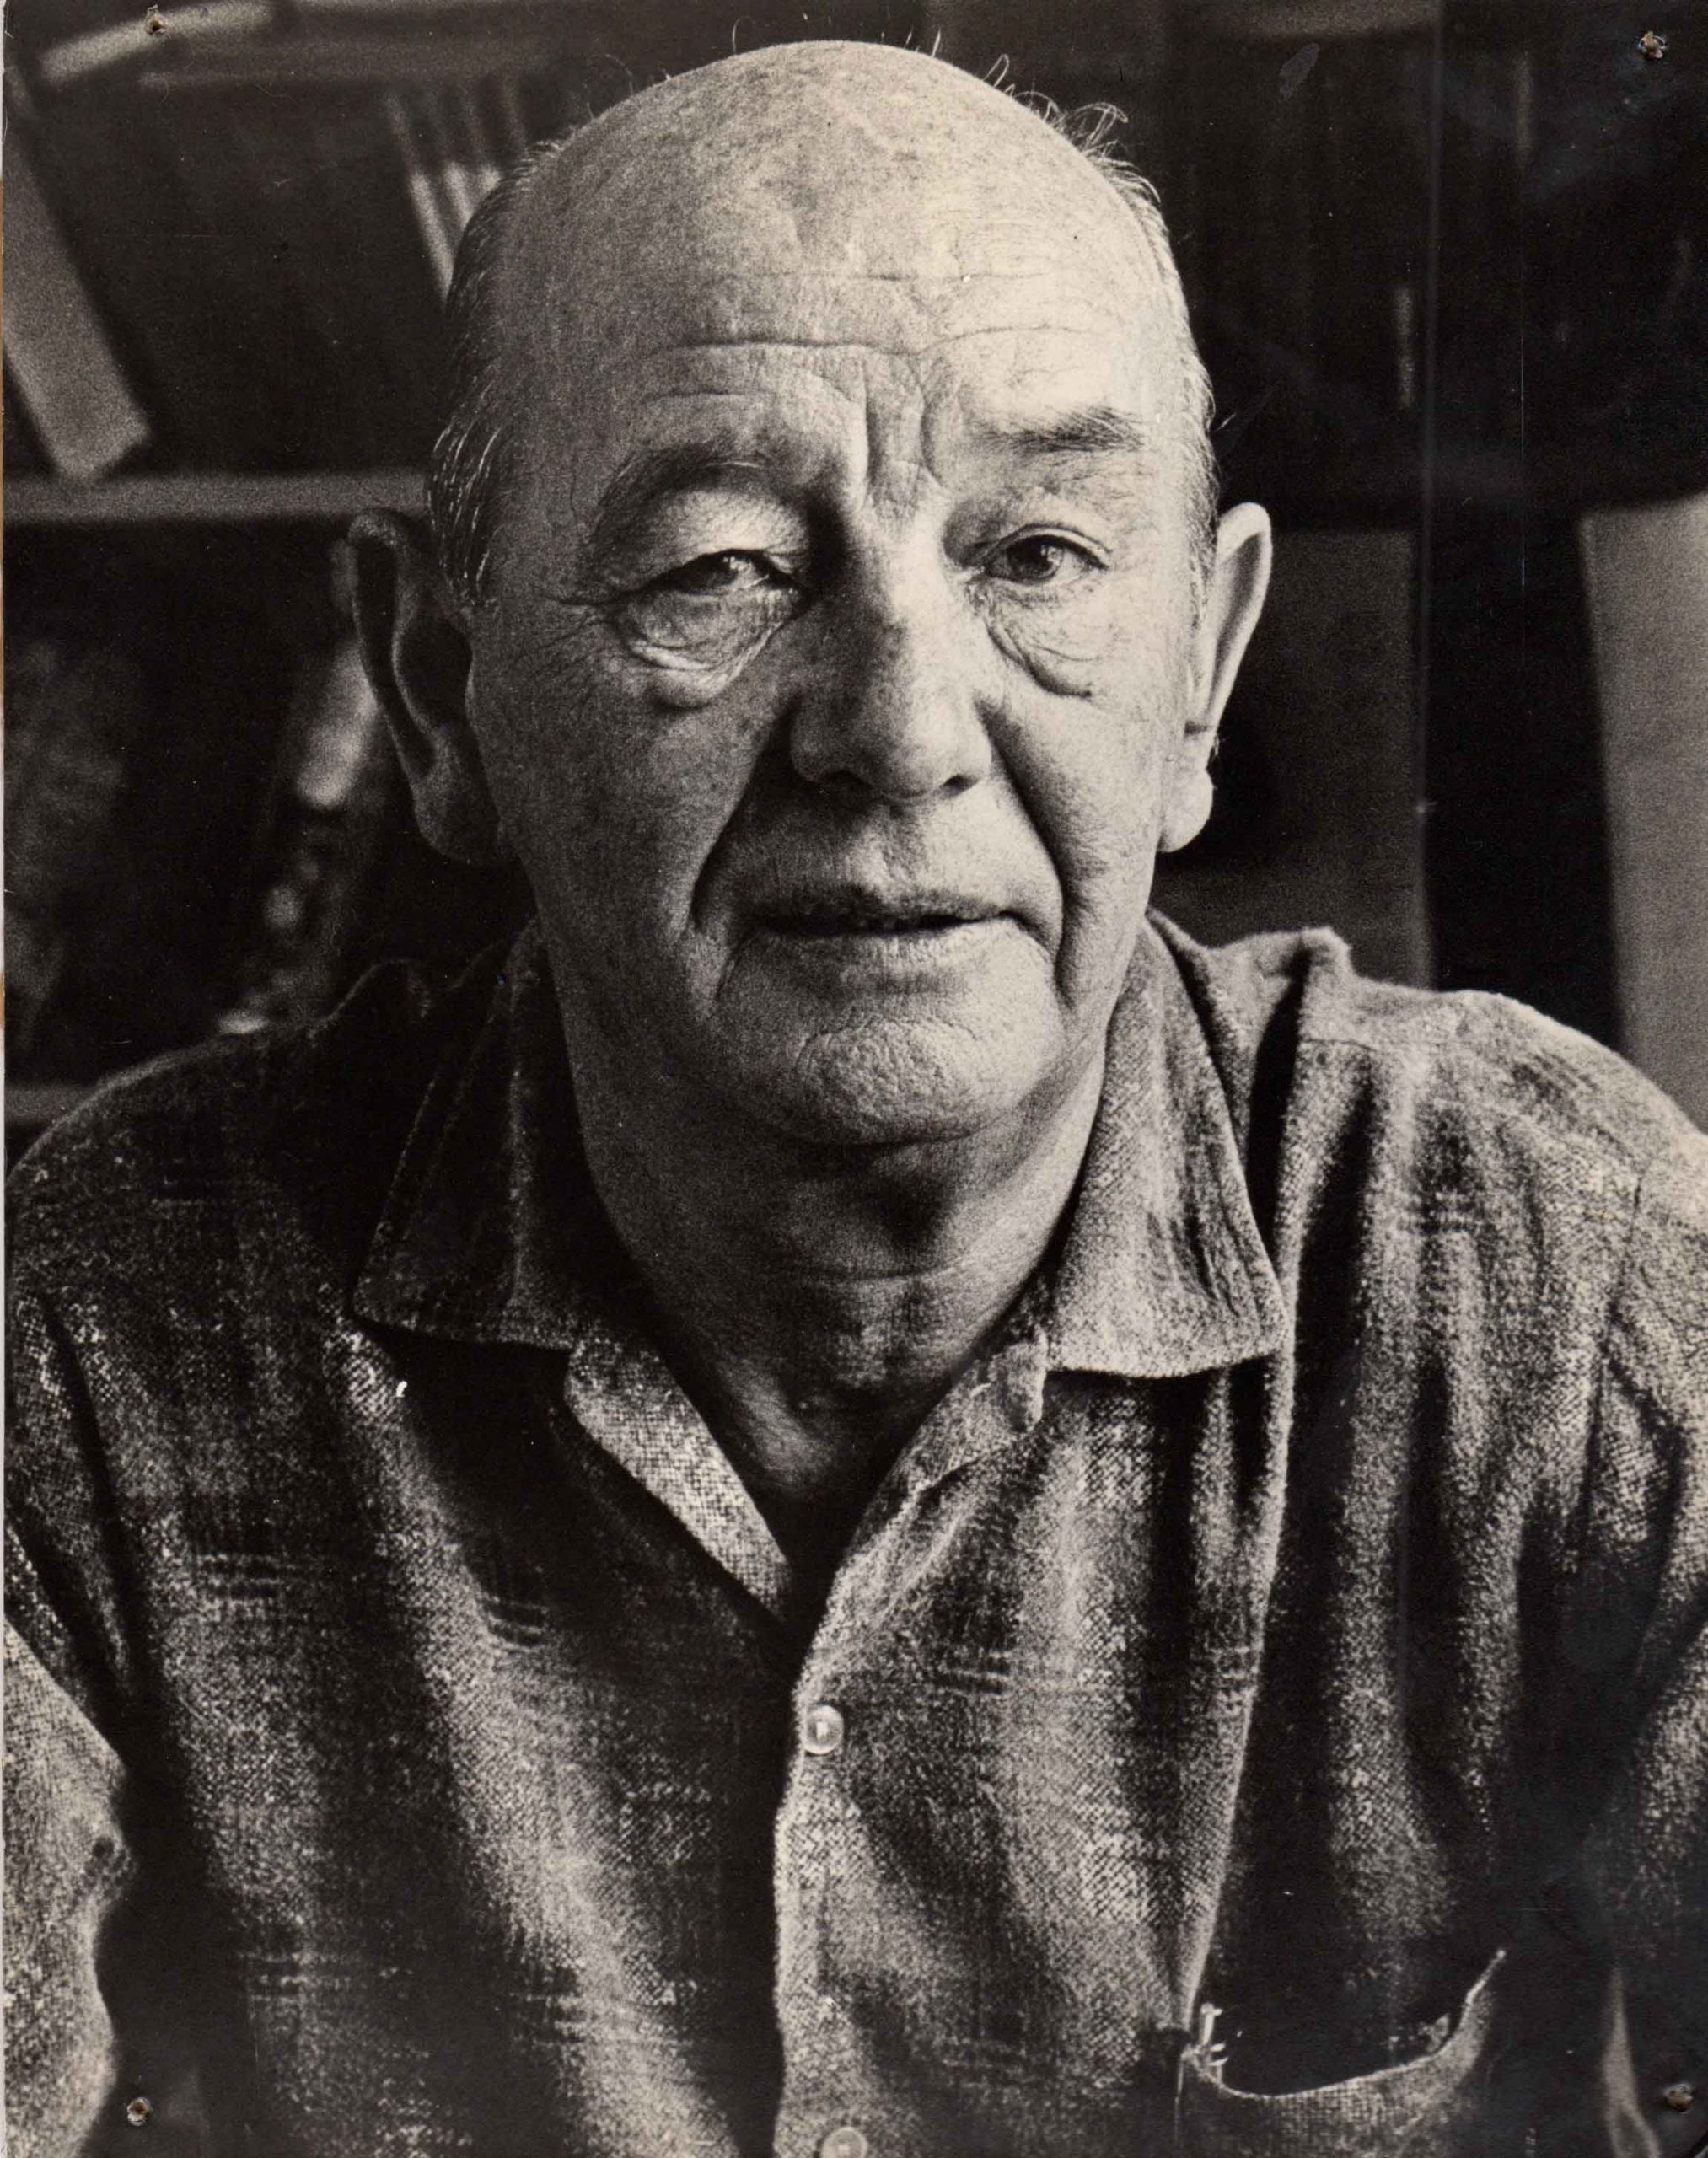 Alexander Archdale founding artistic director 1966